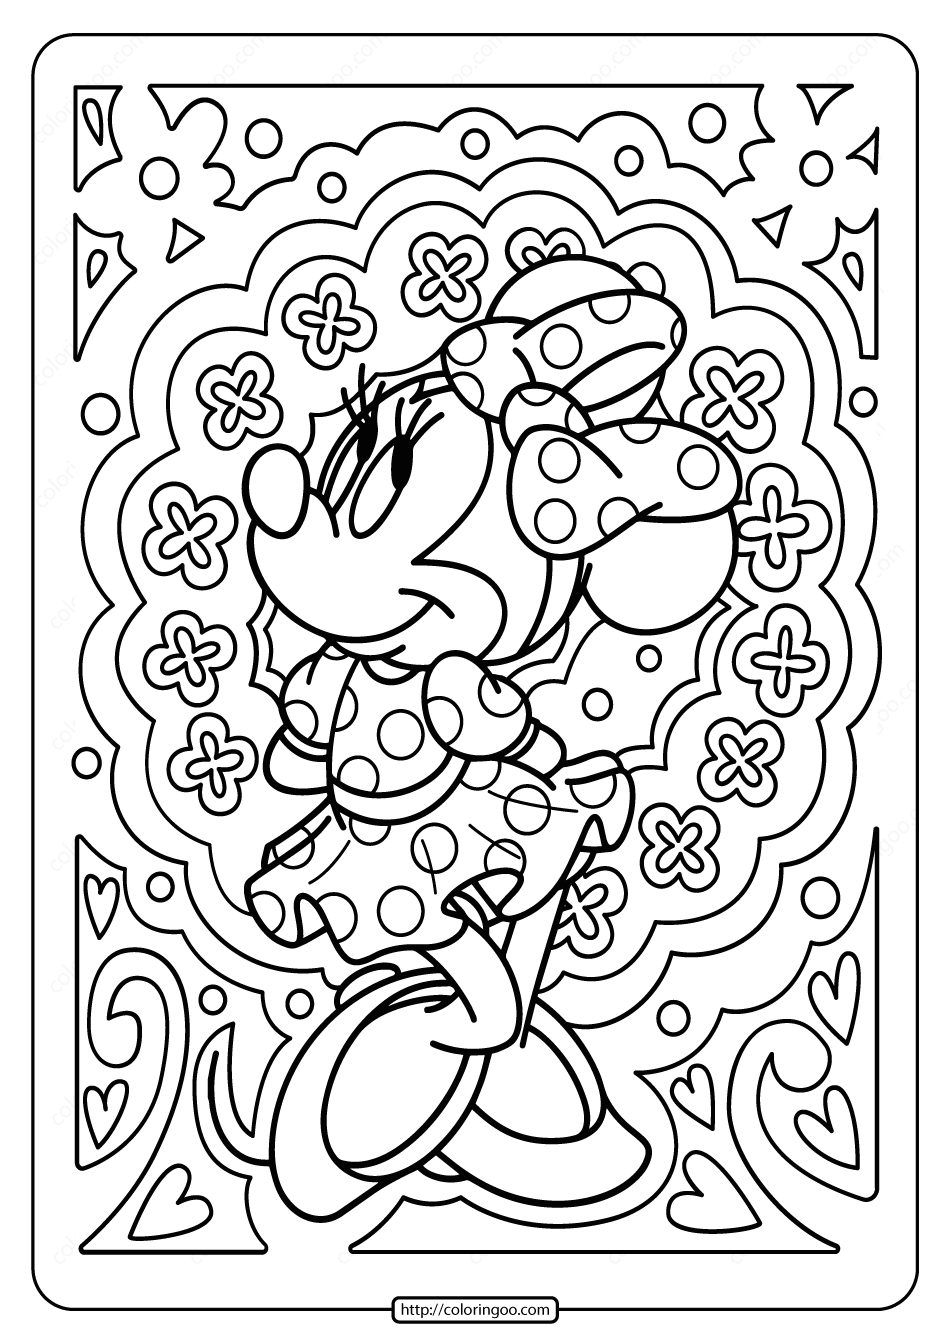 Printable Disney Minnie Mouse Pdf Coloring Page